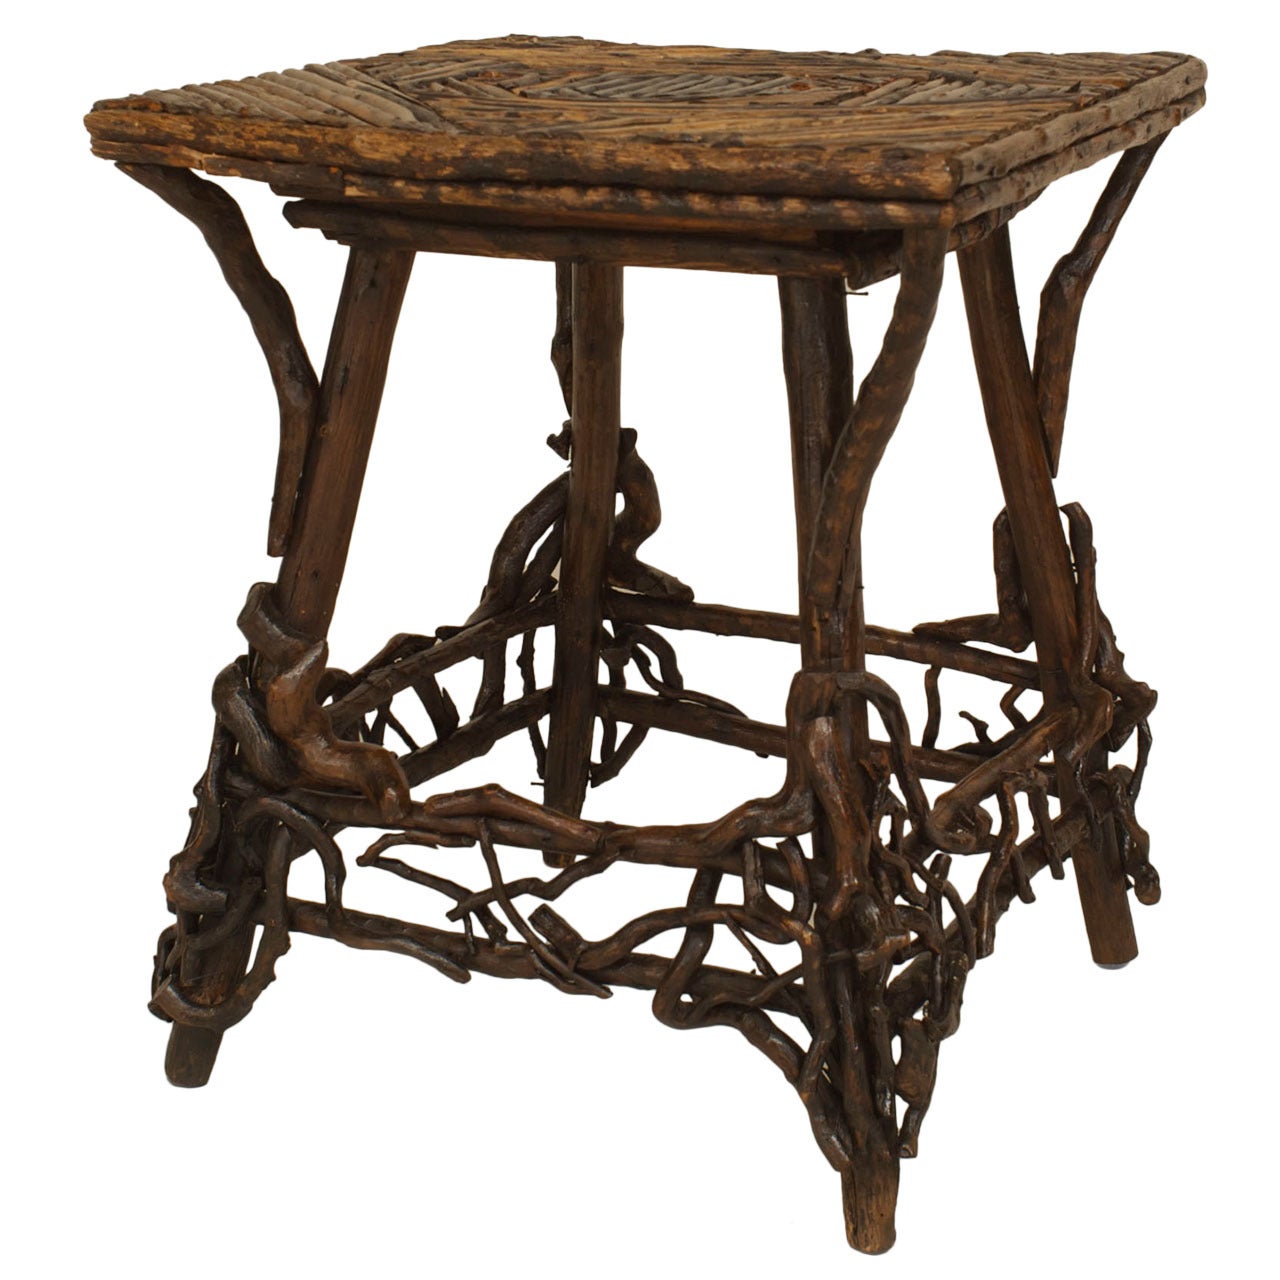 Early 20th c. American Rustic Twig Design End Table